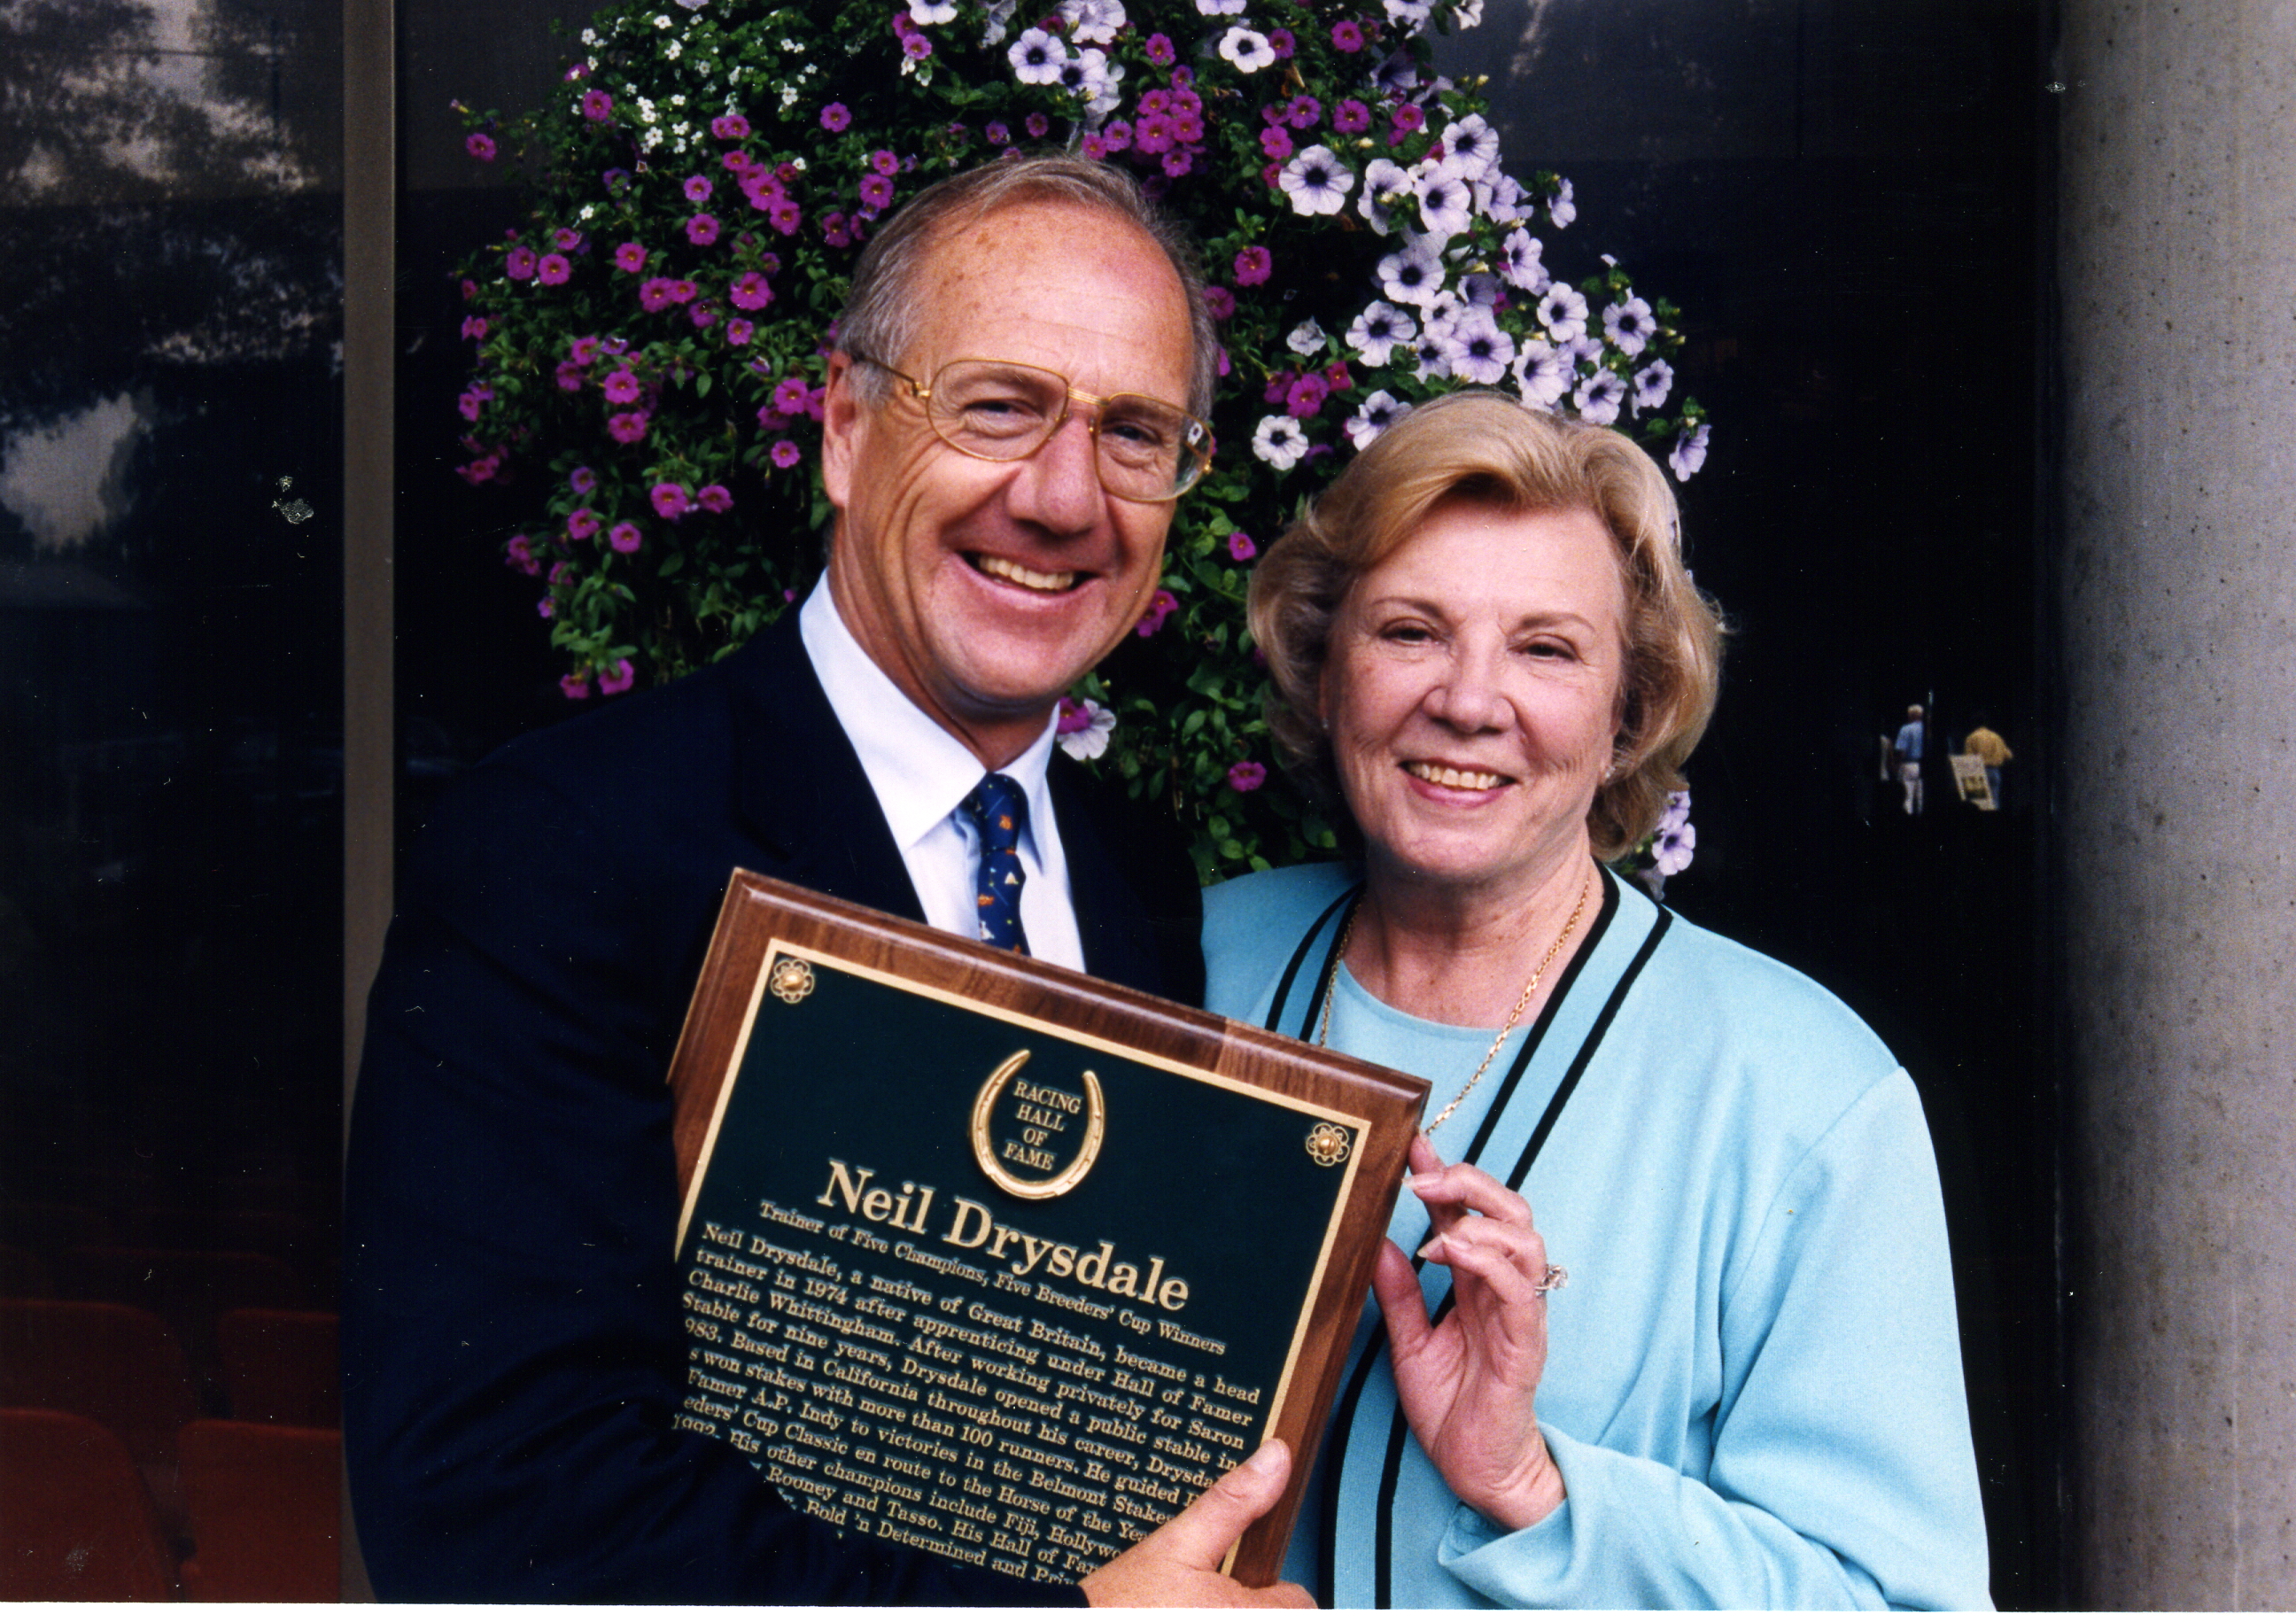 Neil Drysdale and Peggy Whittingham at his Hall of Fame induction in 2000 (Museum Collection)